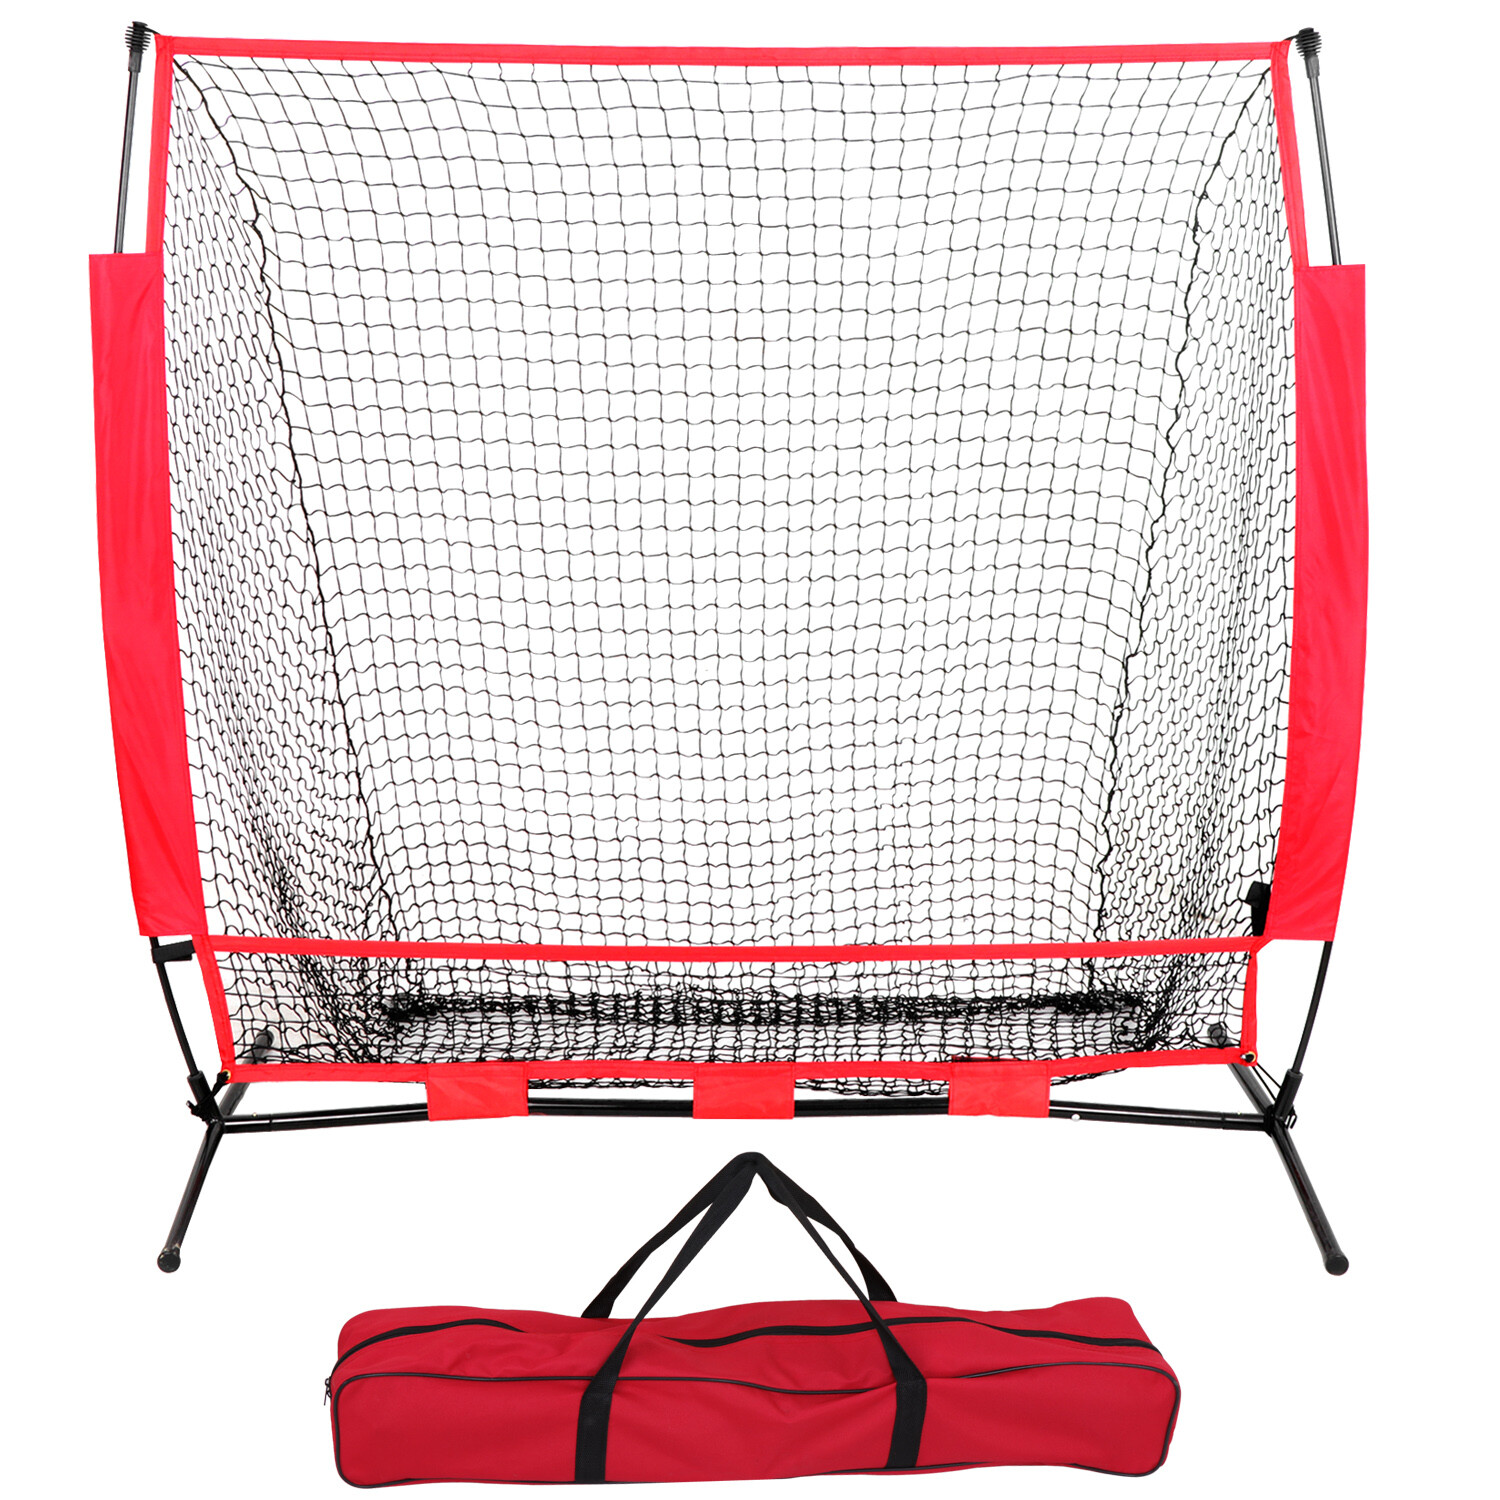 ZenStyle Portable 5 Ft. x 5 Ft. Baseball Softball Practice Net Hitting Pitching Batting Training Net with Carry Bag - image 1 of 10